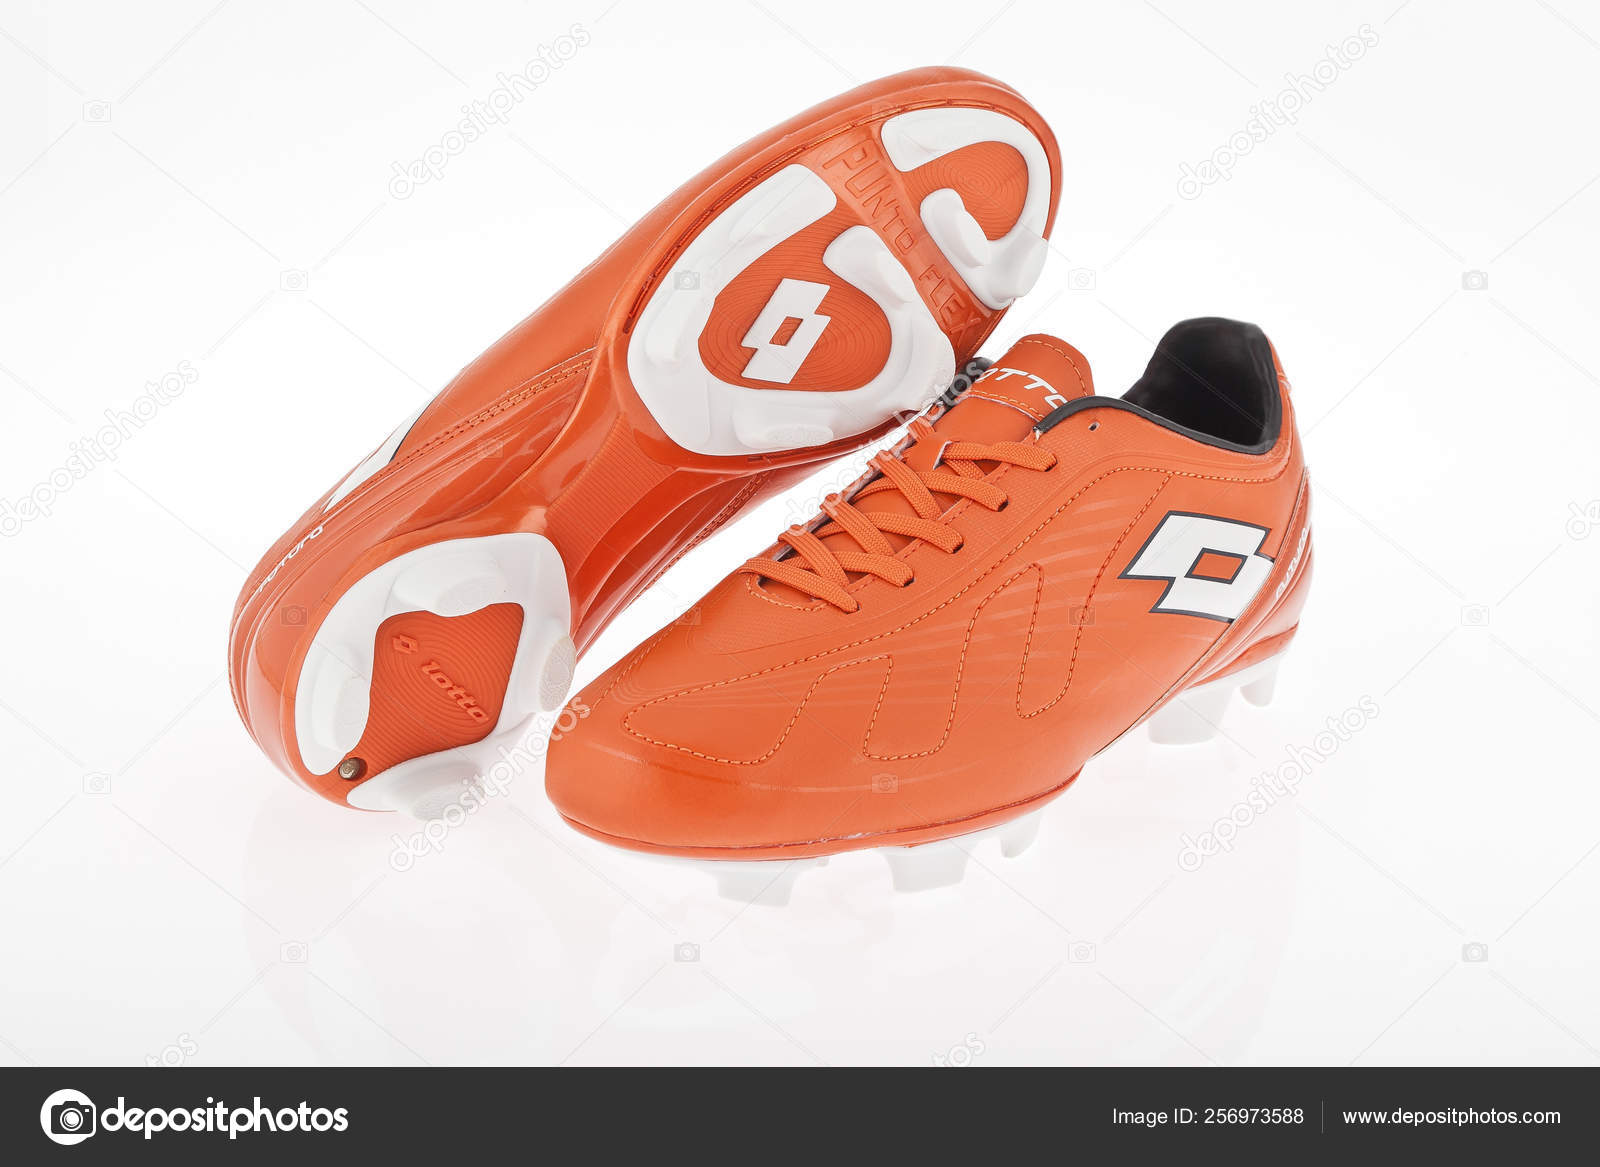 lotto soccer cleats